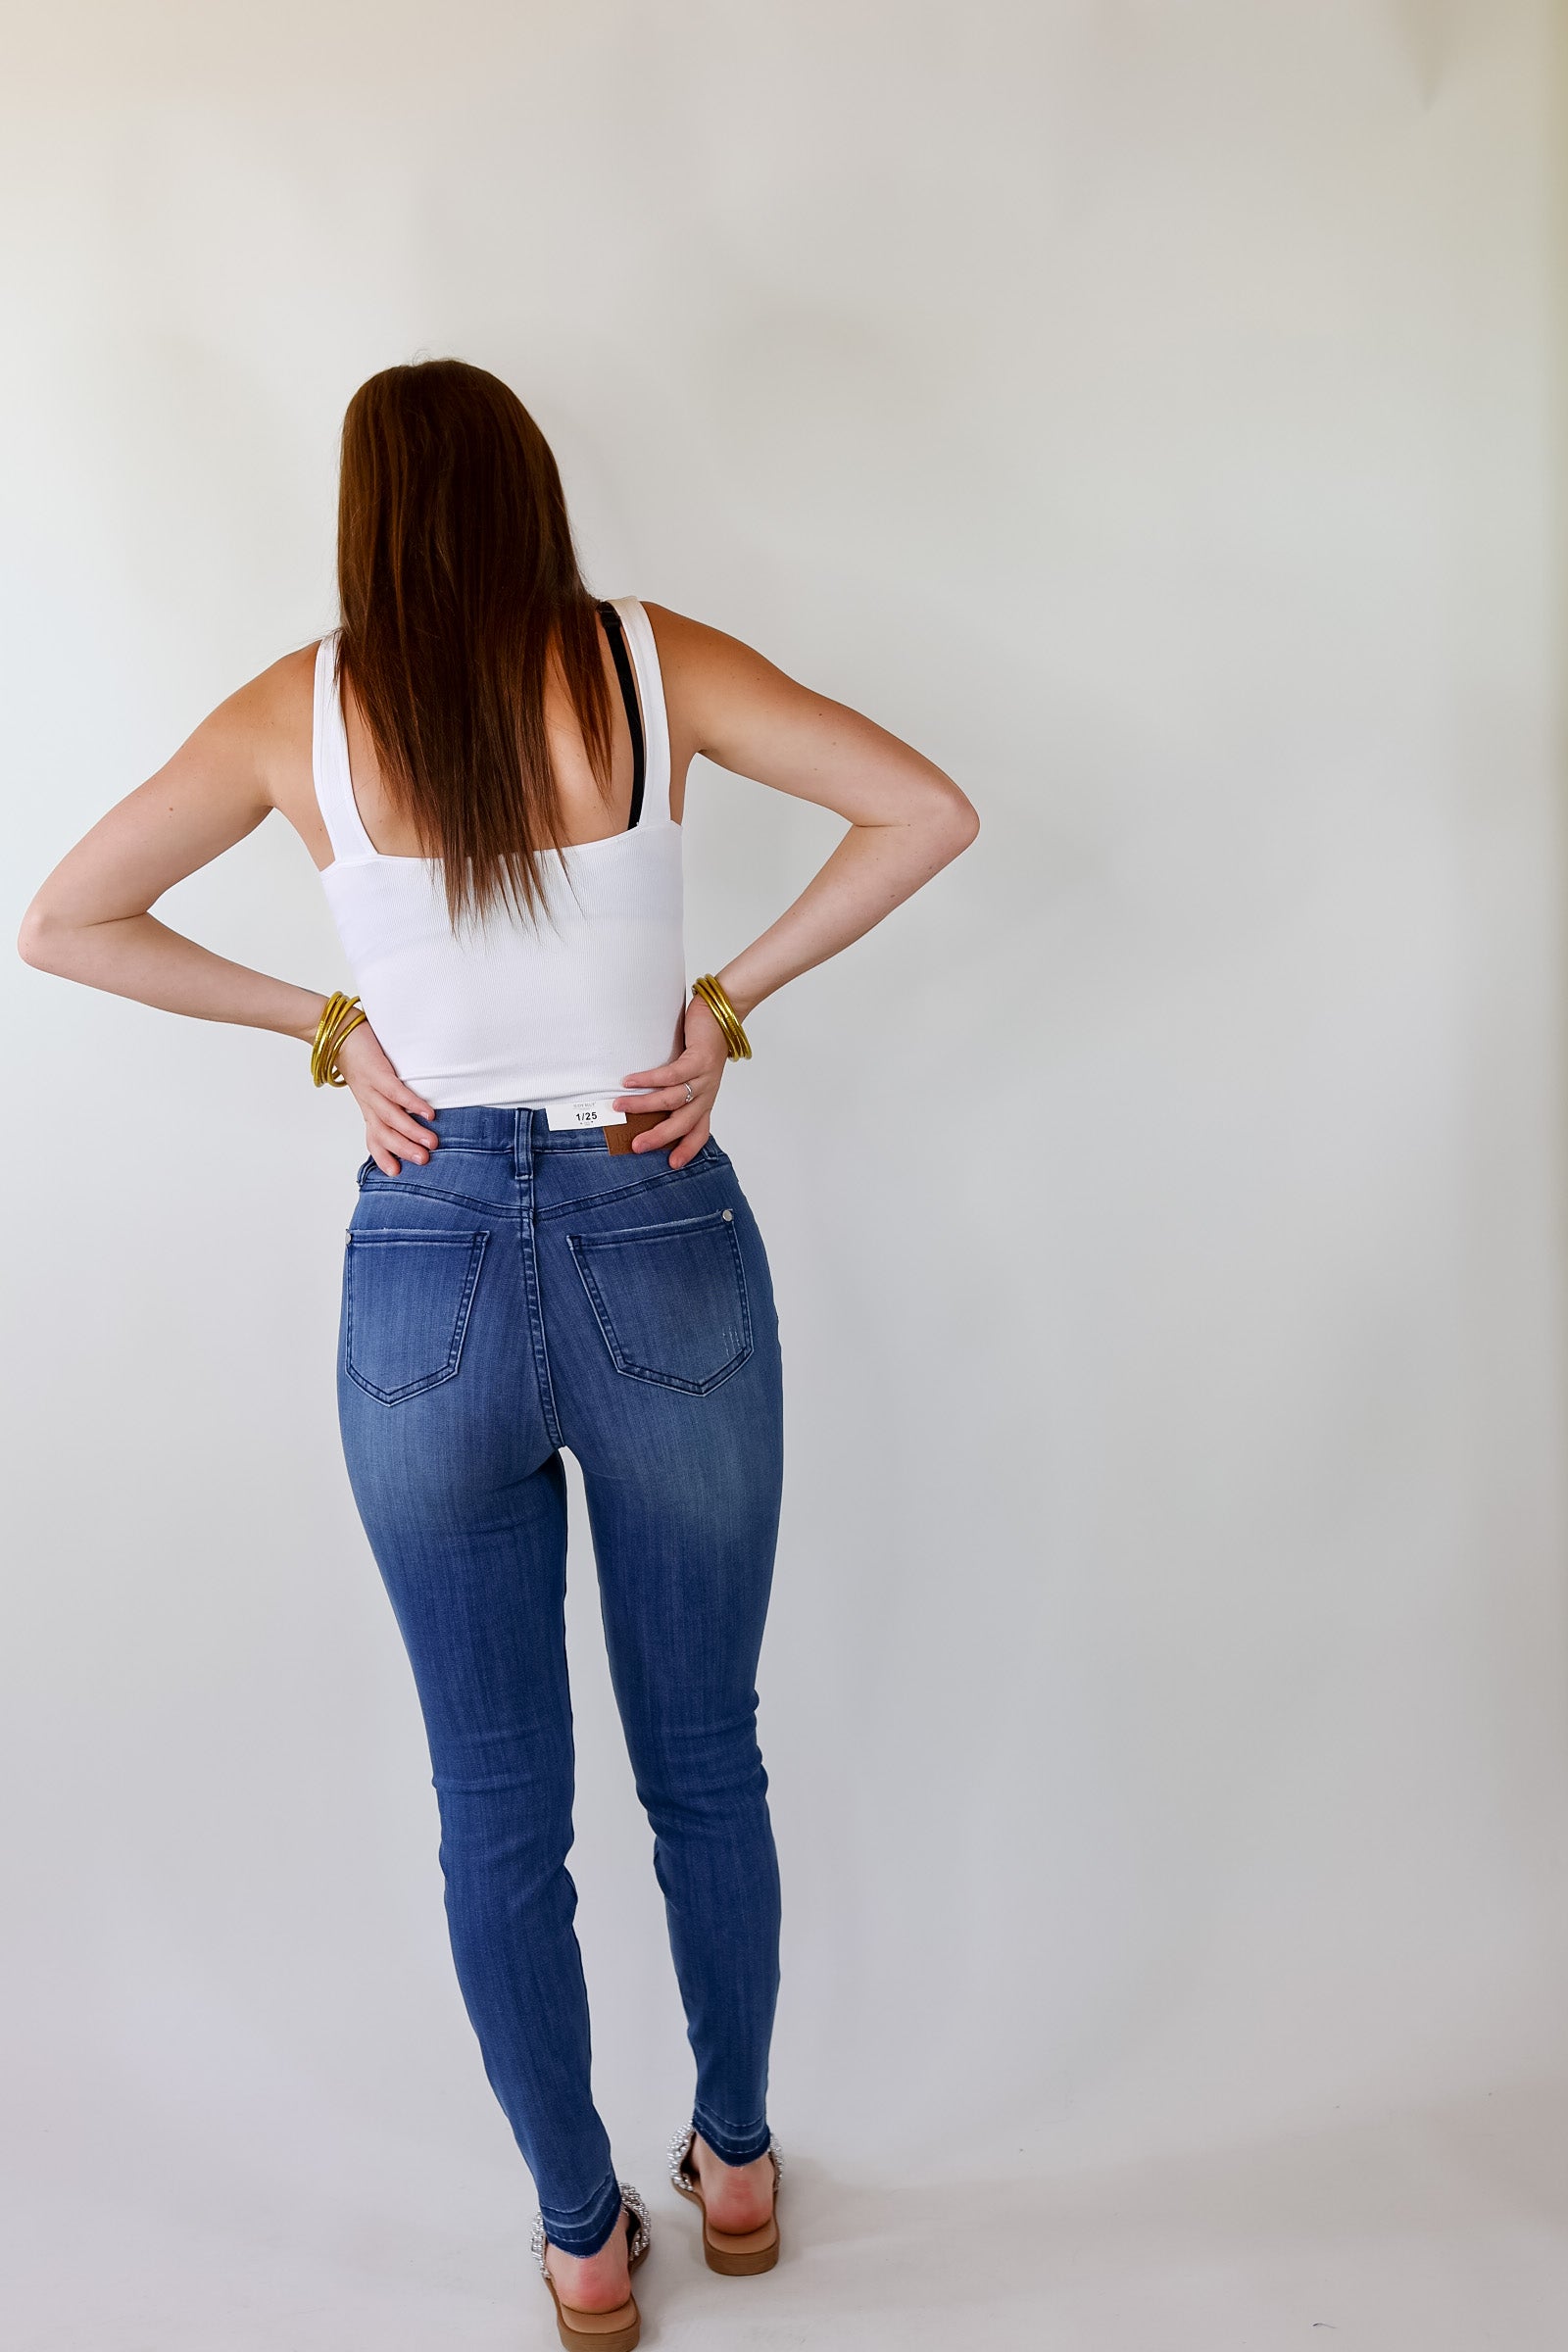 Judy Blue | Free To Dream Elastic Waist Pull On Skinny Jeans with Release Hem in Medium Wash - Giddy Up Glamour Boutique